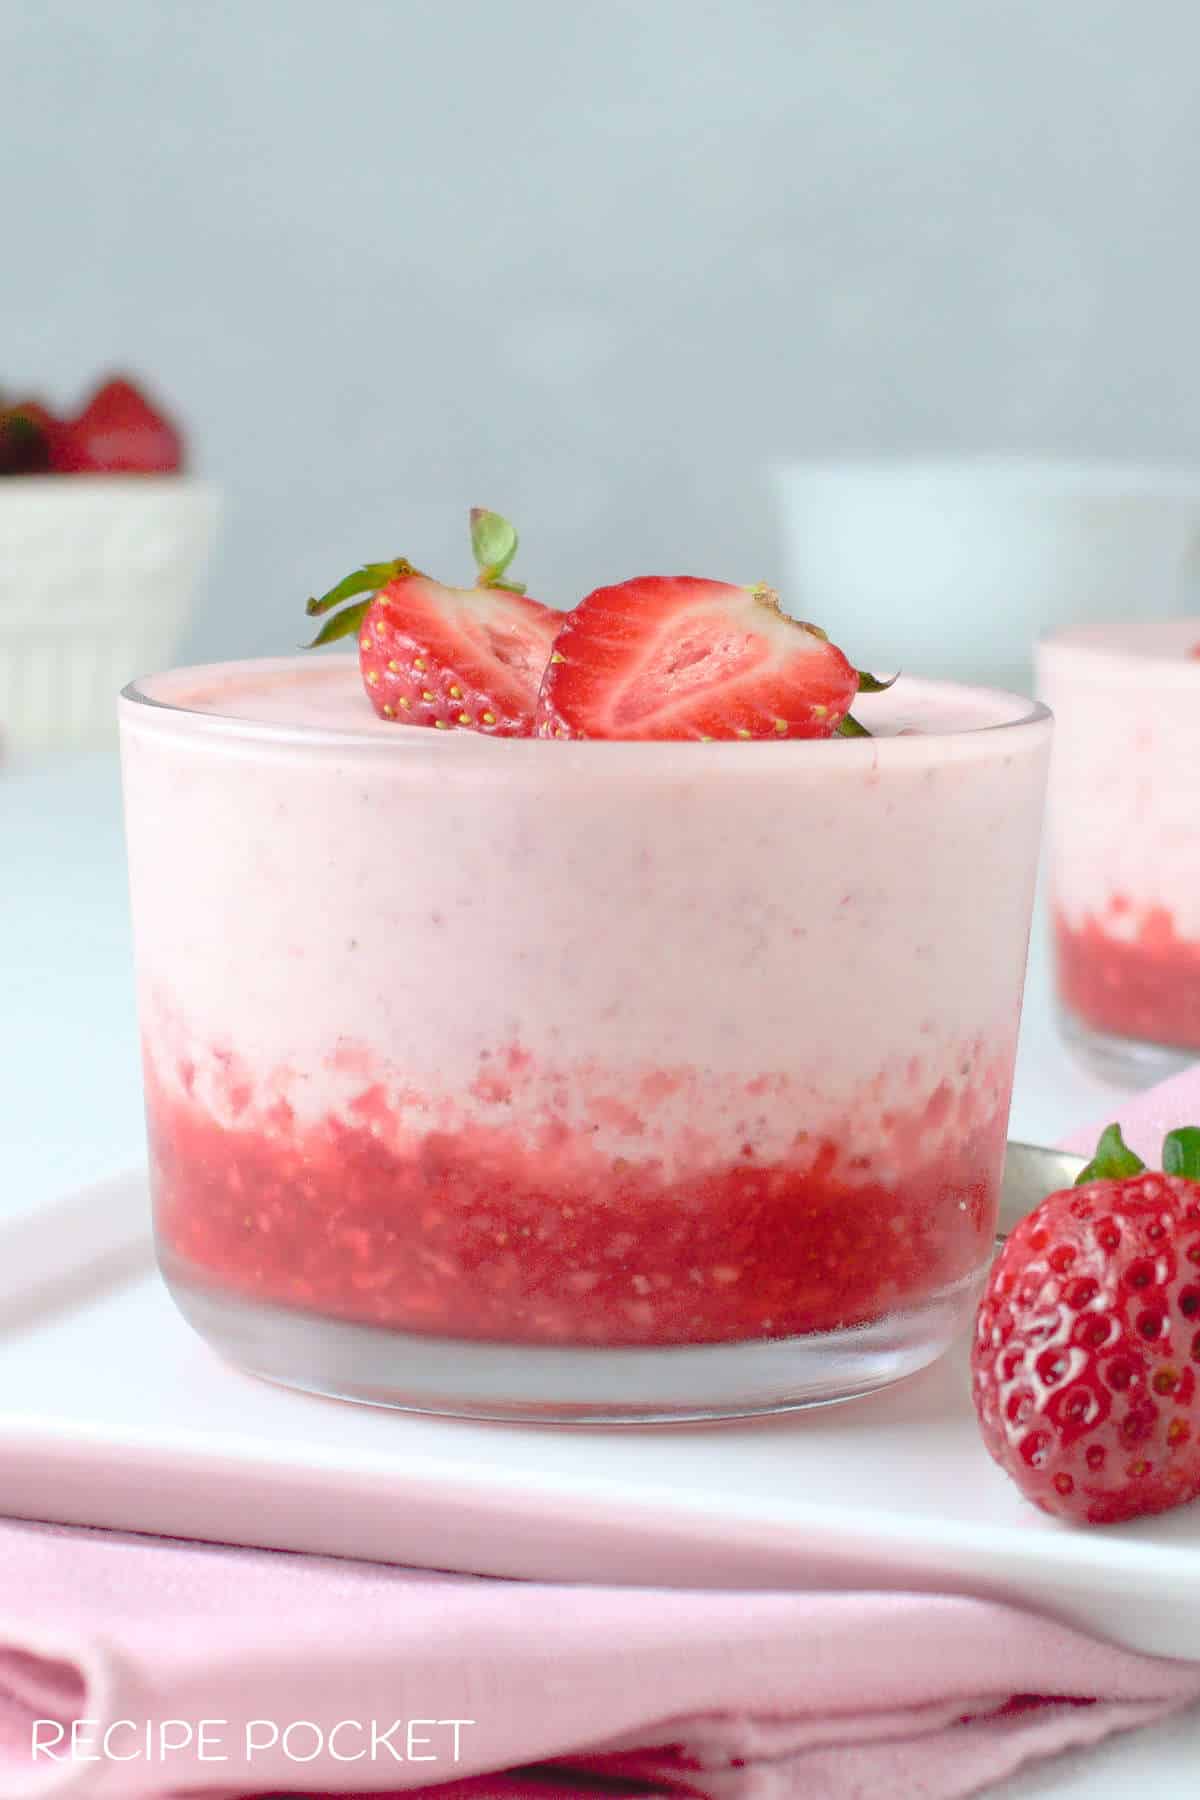 Strawberry fool on a white plate garnished with fresh strawberries.